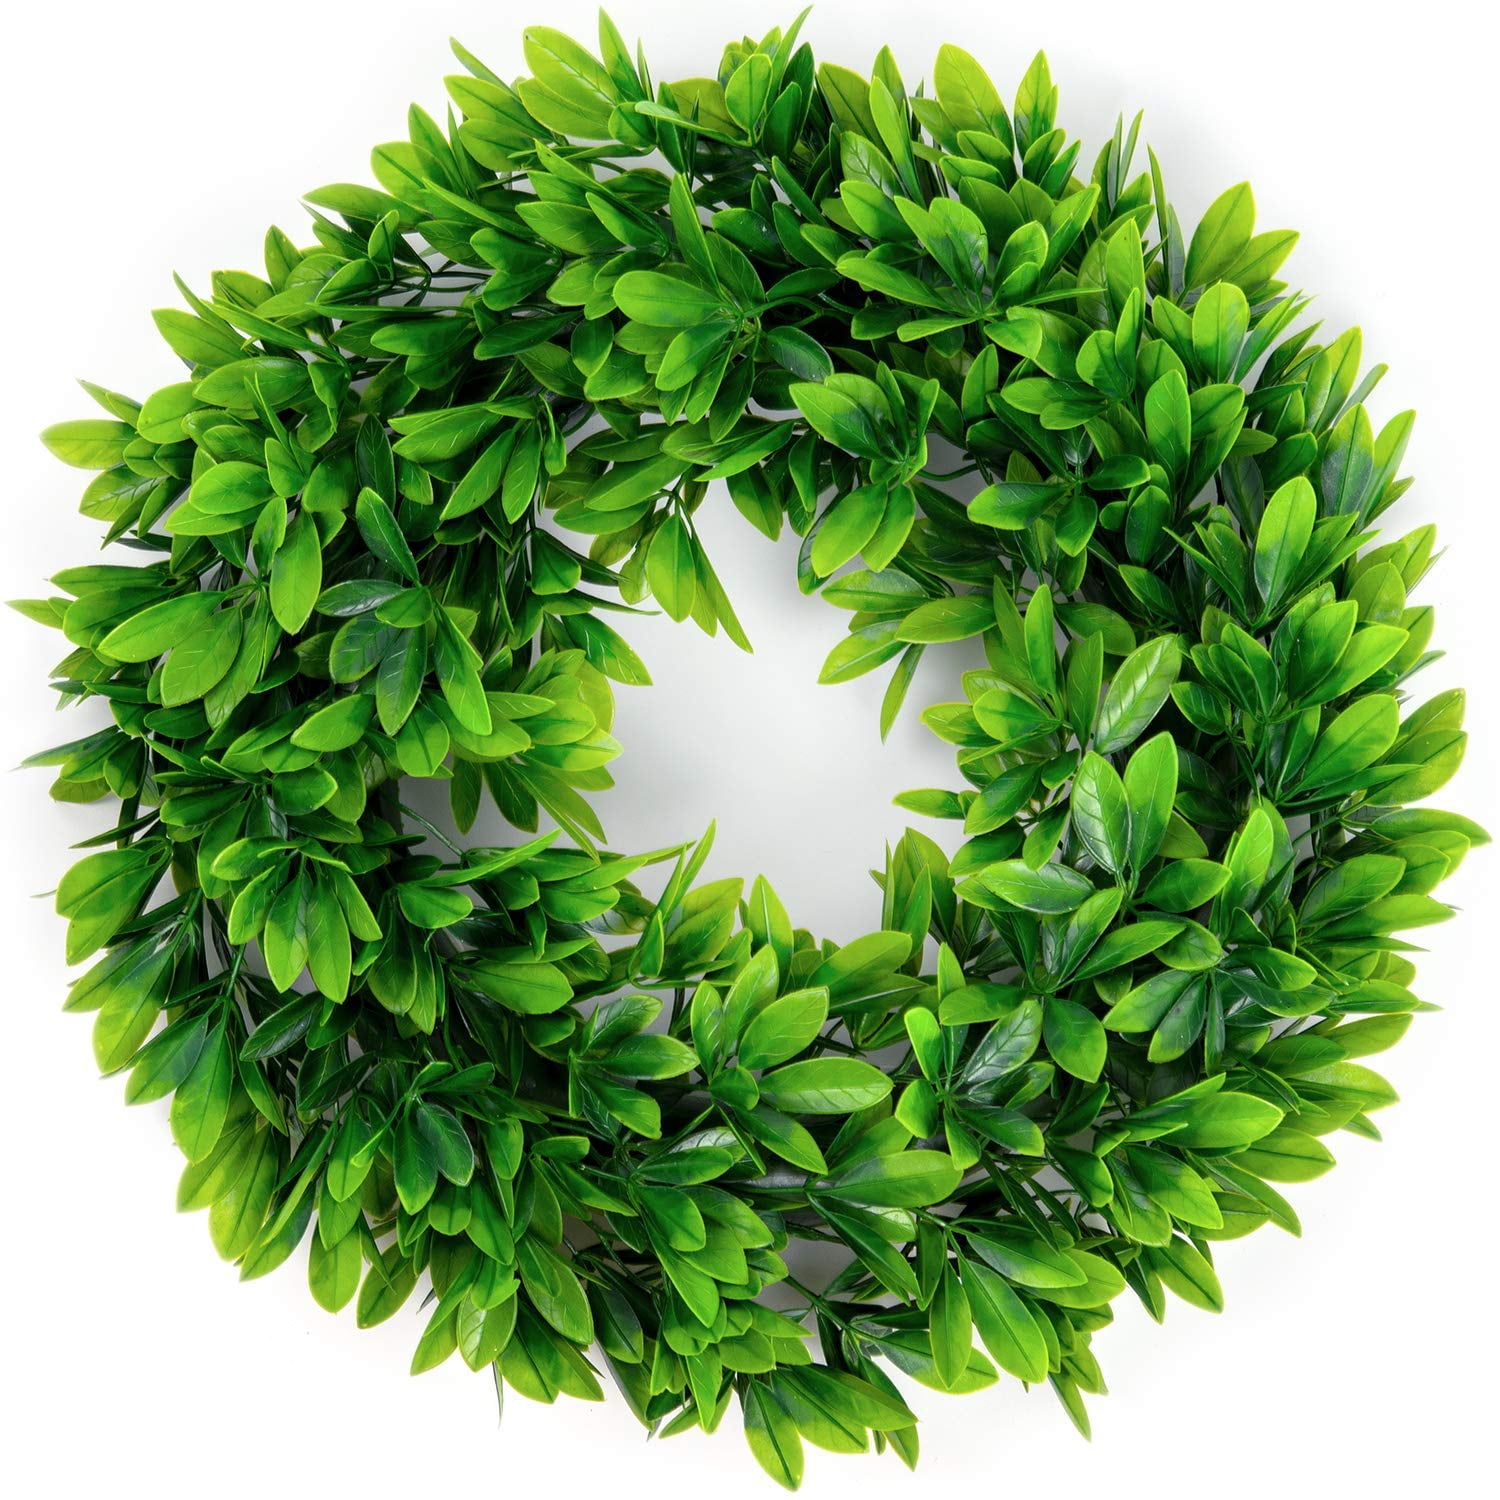 15" Boxwood Wreath Green Bundled with 2 Hooks for Hanging Indoor or Outdoor 